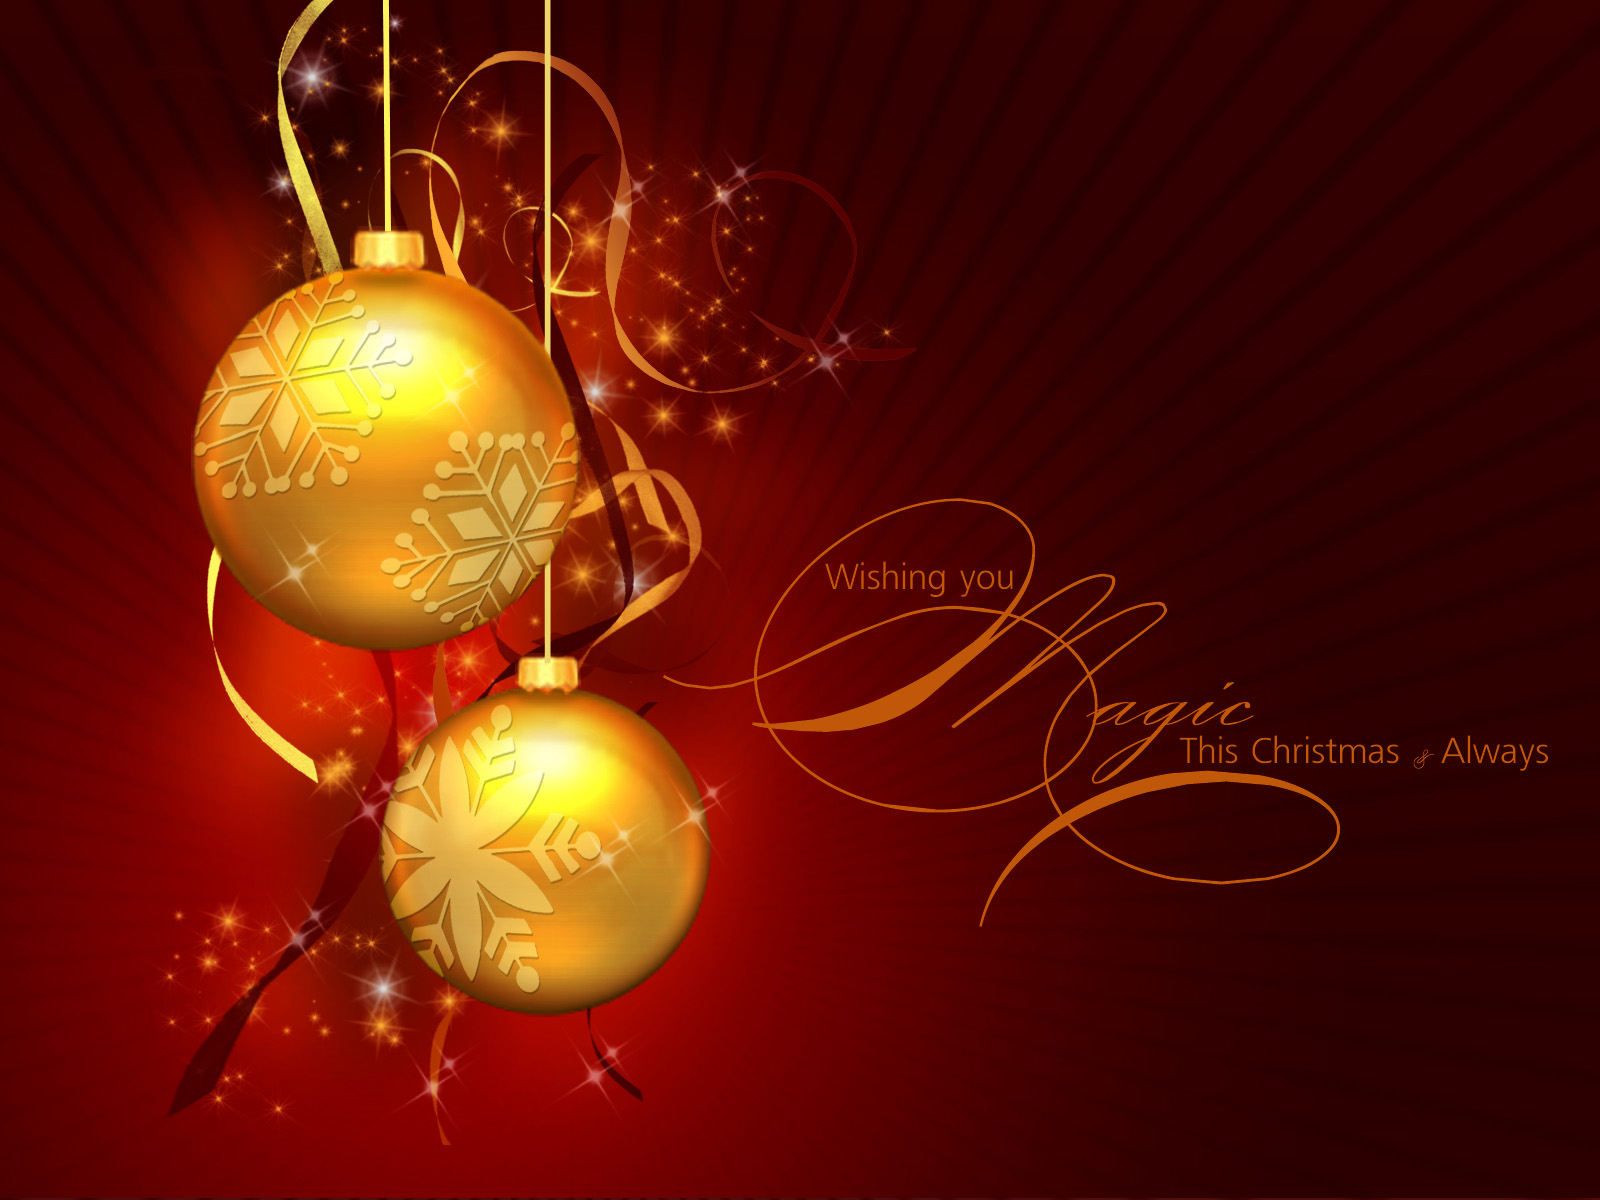 High Definition Photo And Wallpaper Christmas